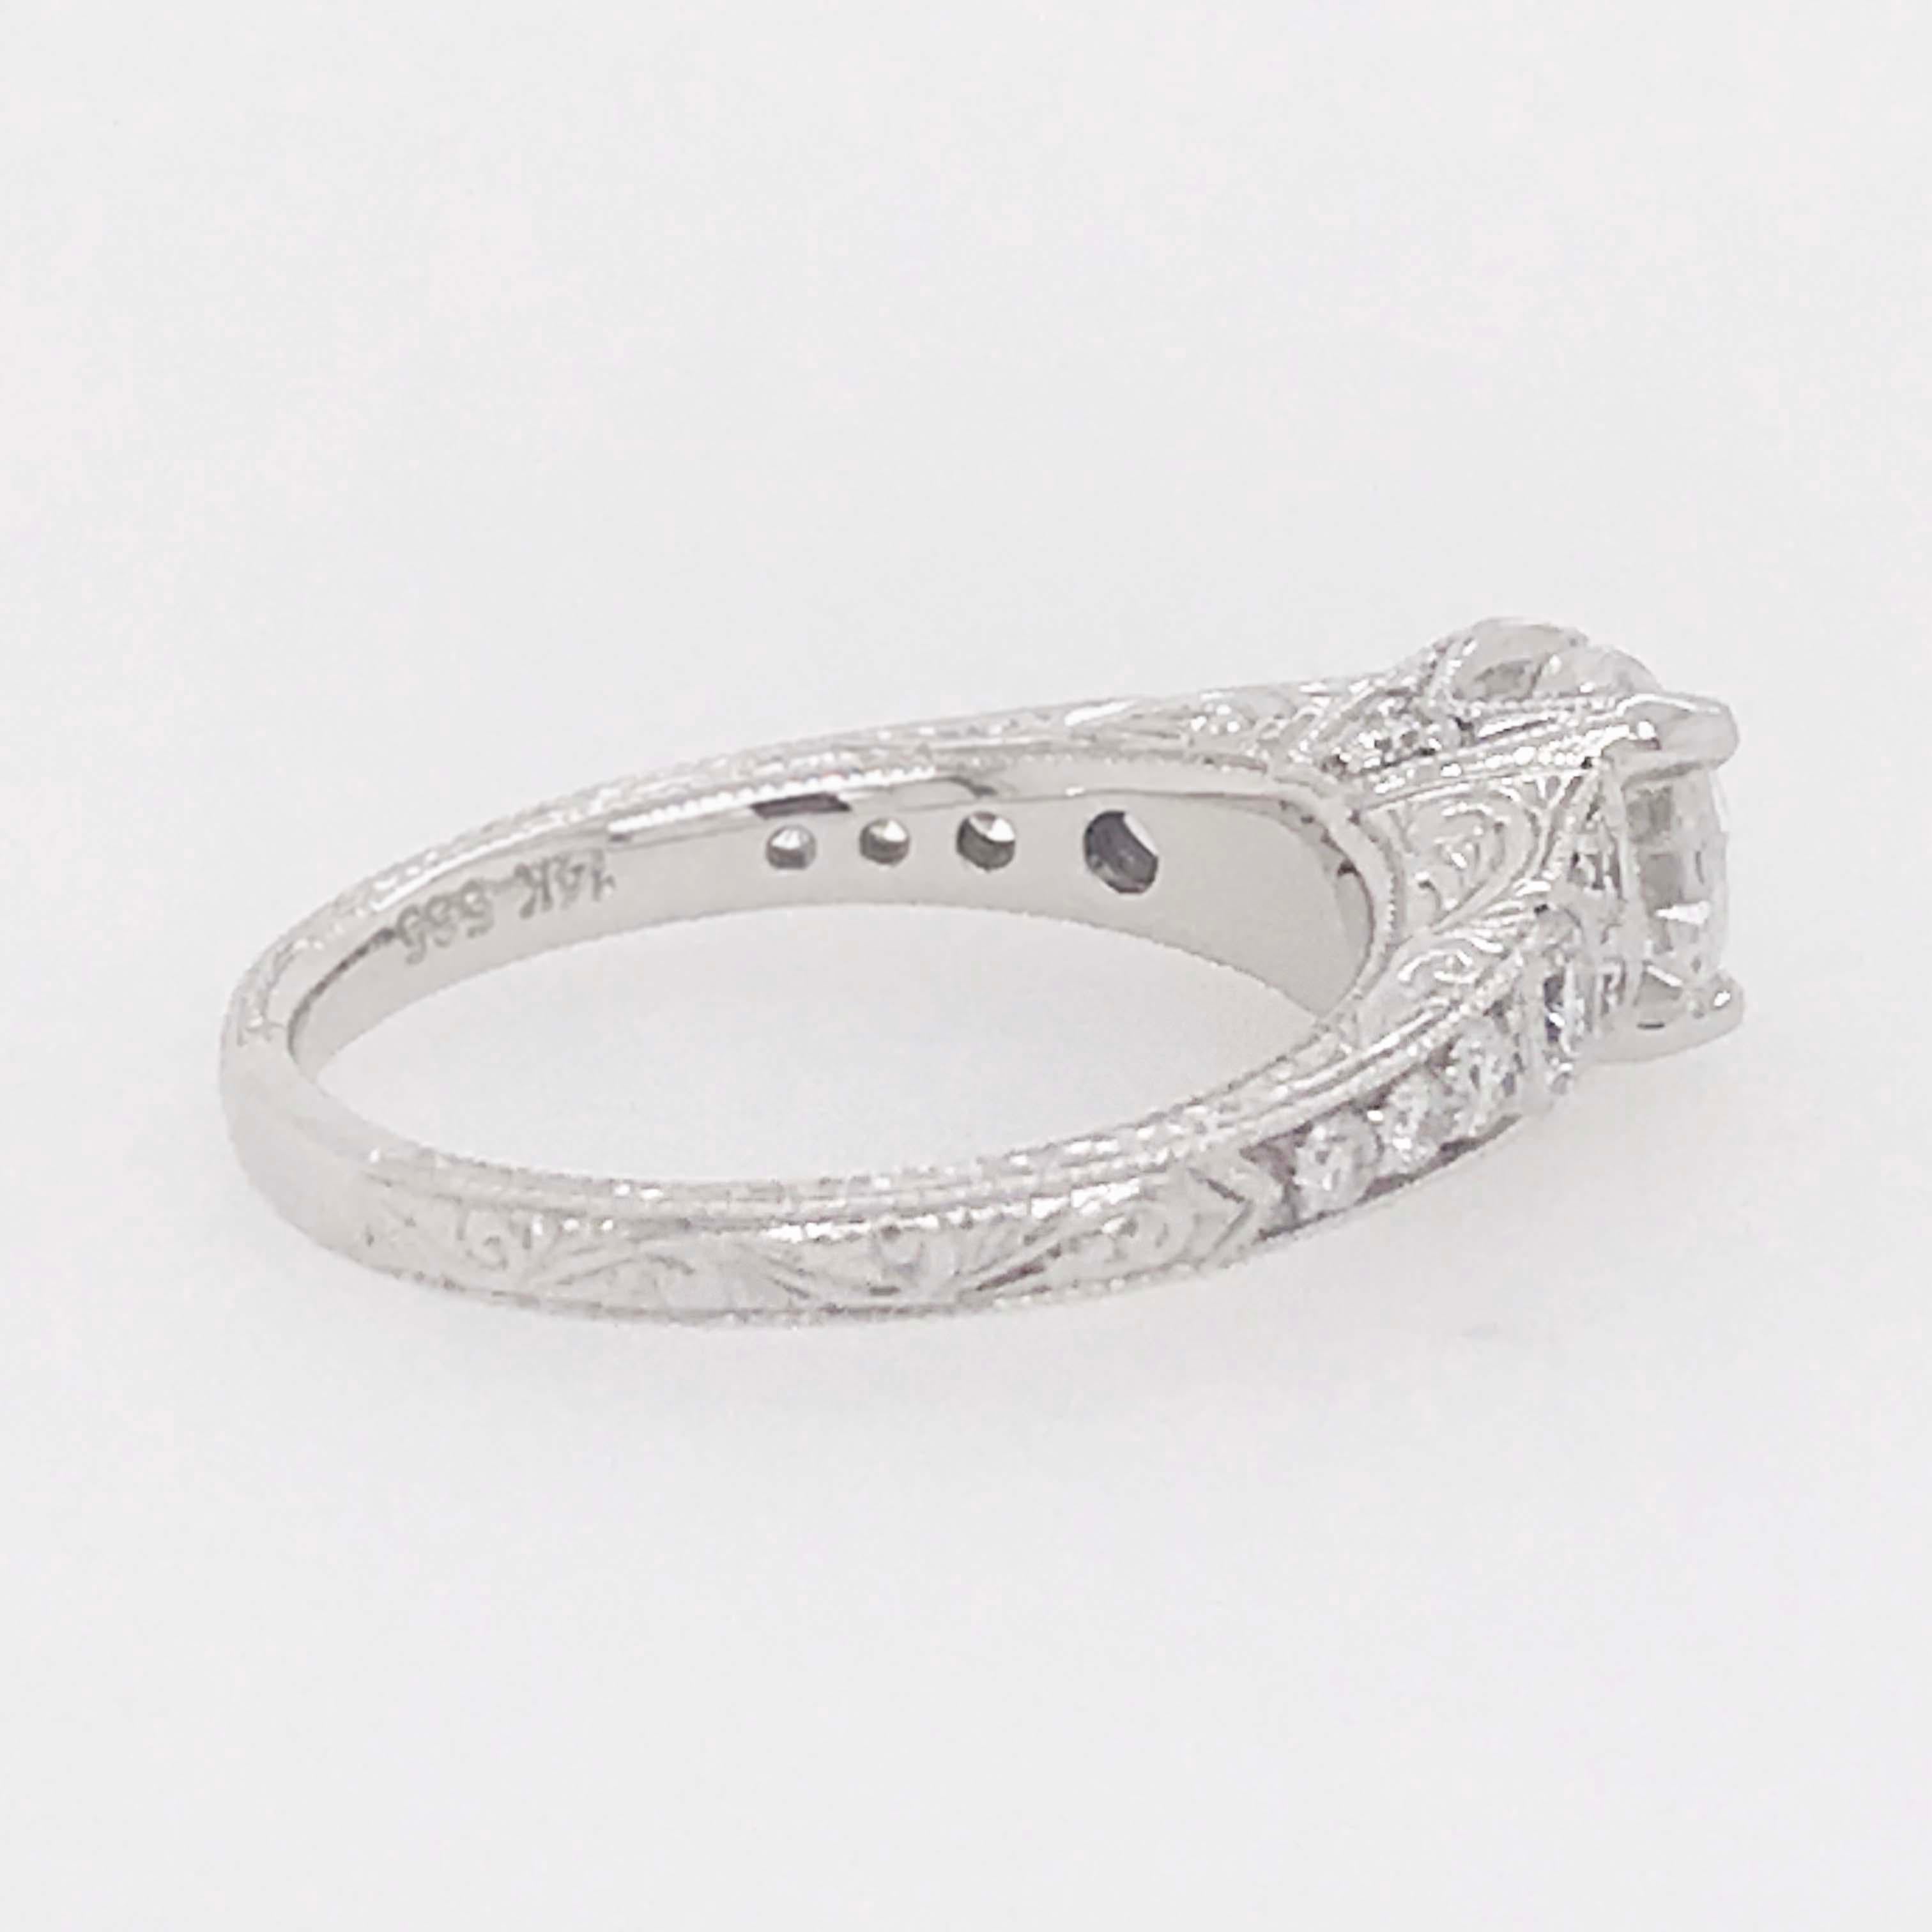 Round Cut Certified 1 Carat Diamond Vintage Style Ring and Antique Hand Engraving For Sale